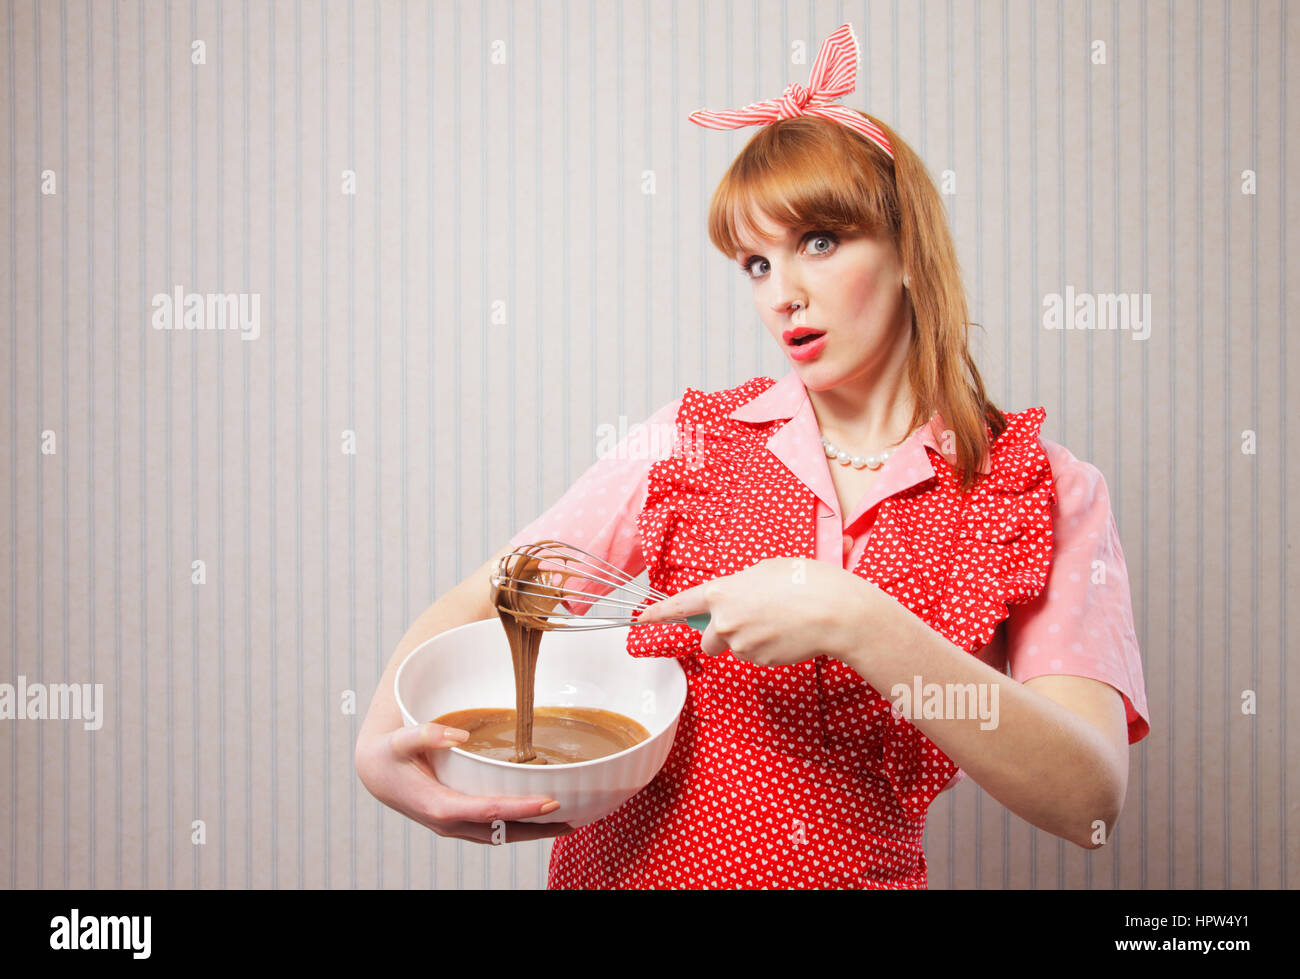 Stereotypical housewife, manual mixer and bowl, on wallpaper background Stock Photo